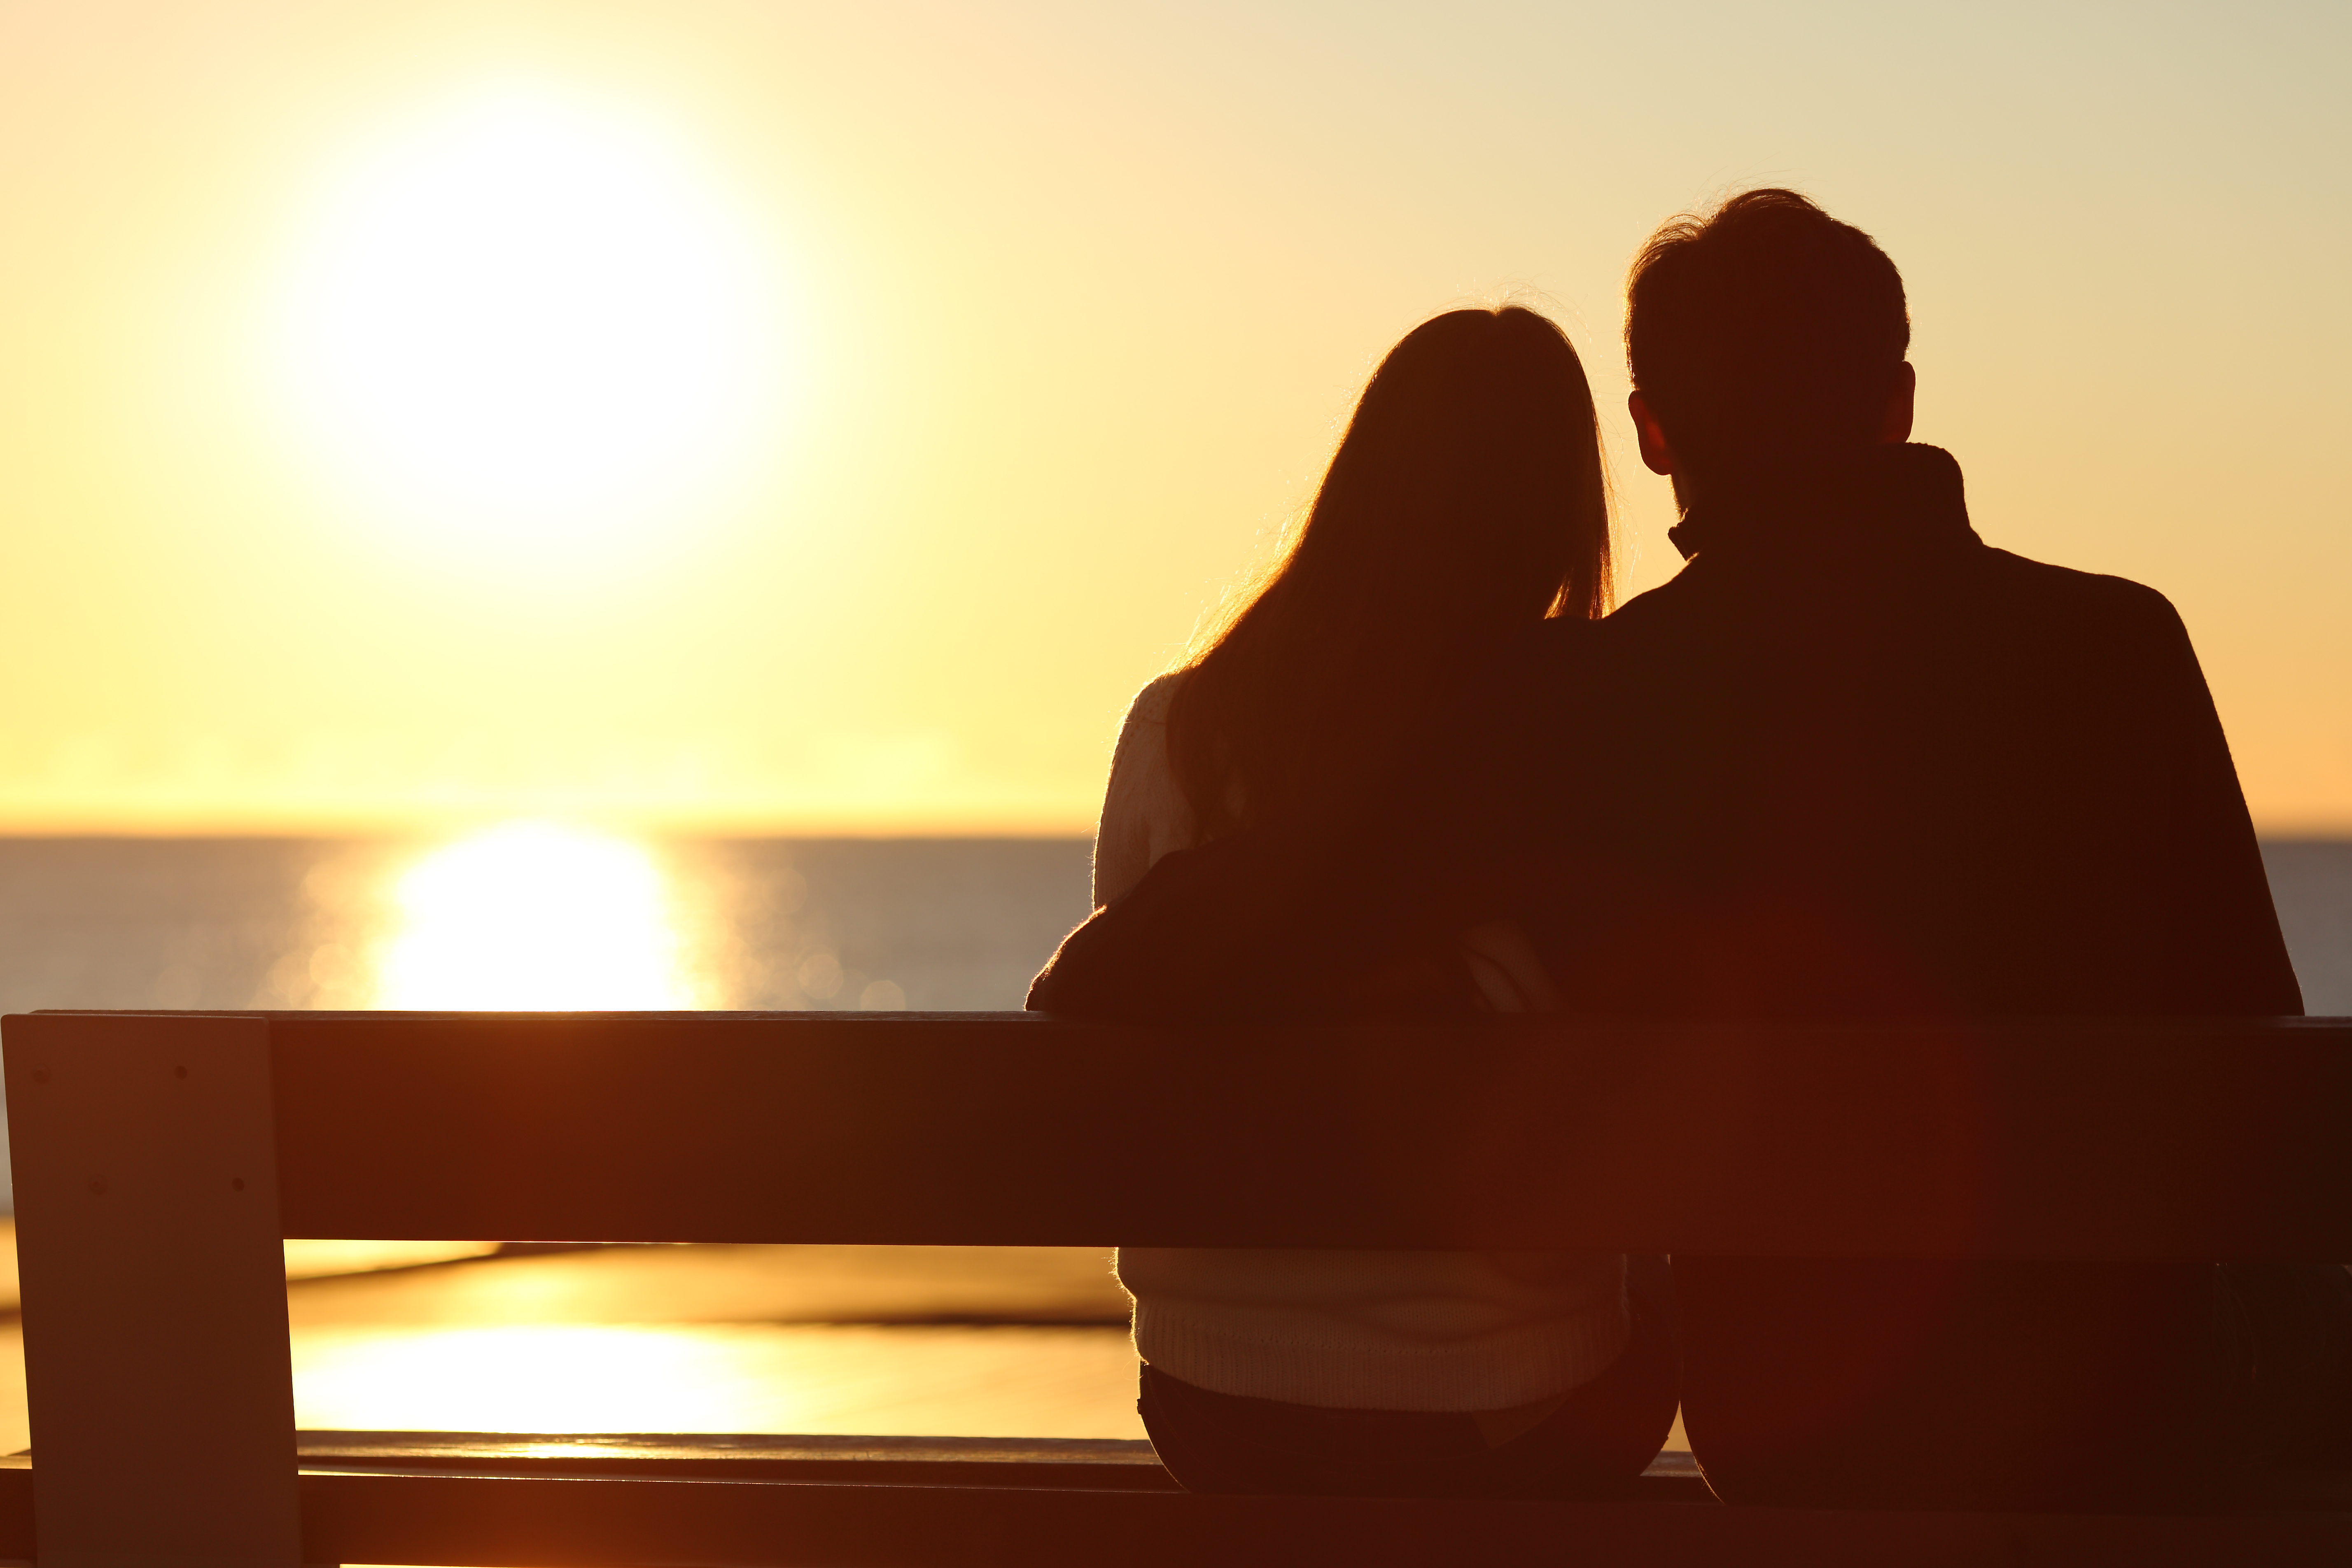 Silhouette of a couple watching the sun on the beach | Source: Shutterstock